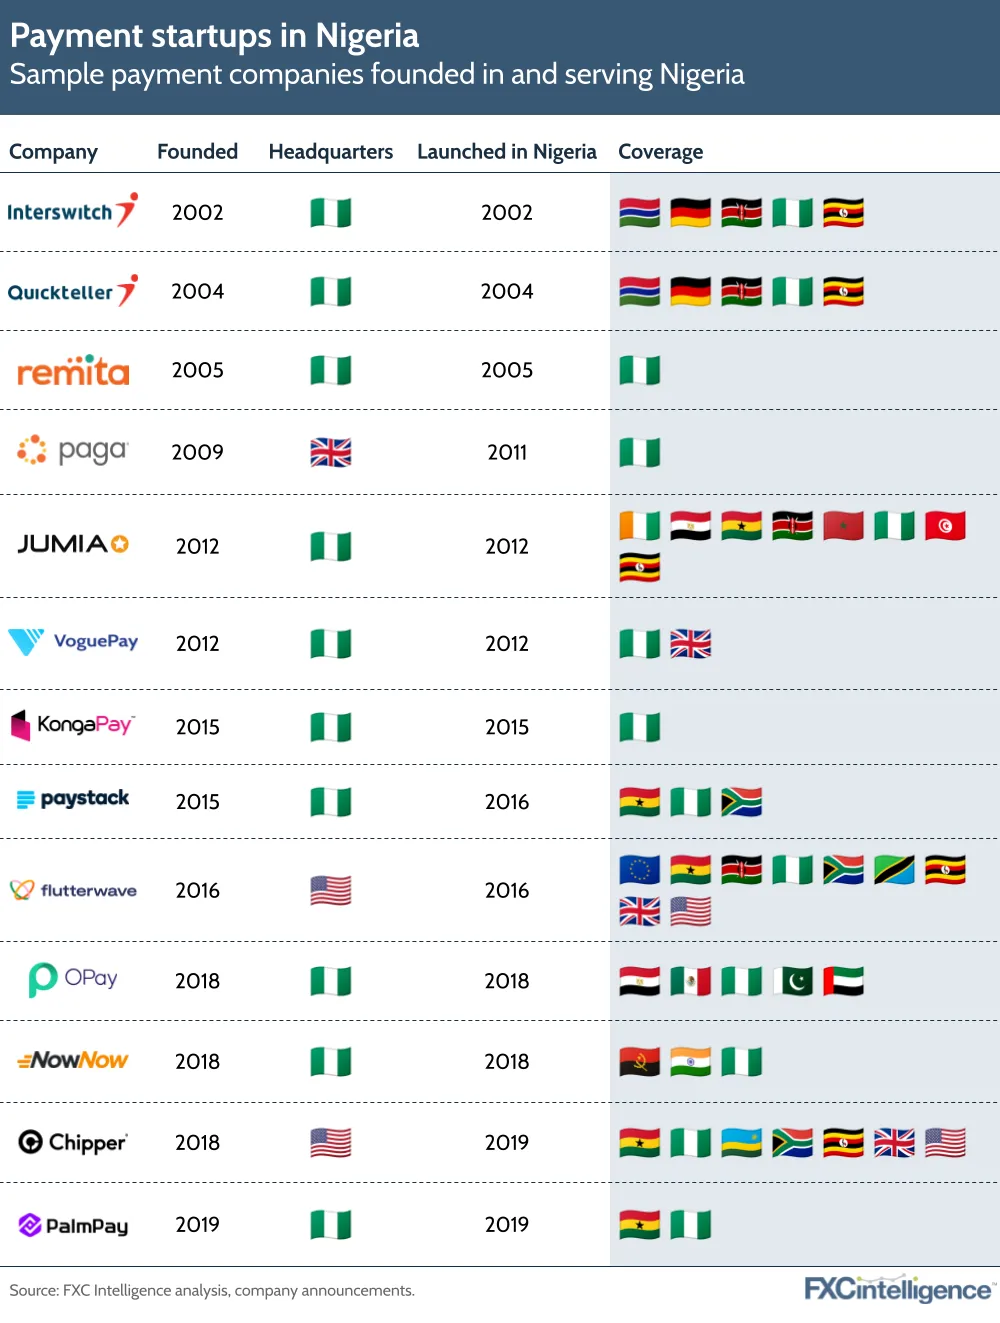 Payment startups in Nigeria
Sample payment companies founded in and serving Nigeria